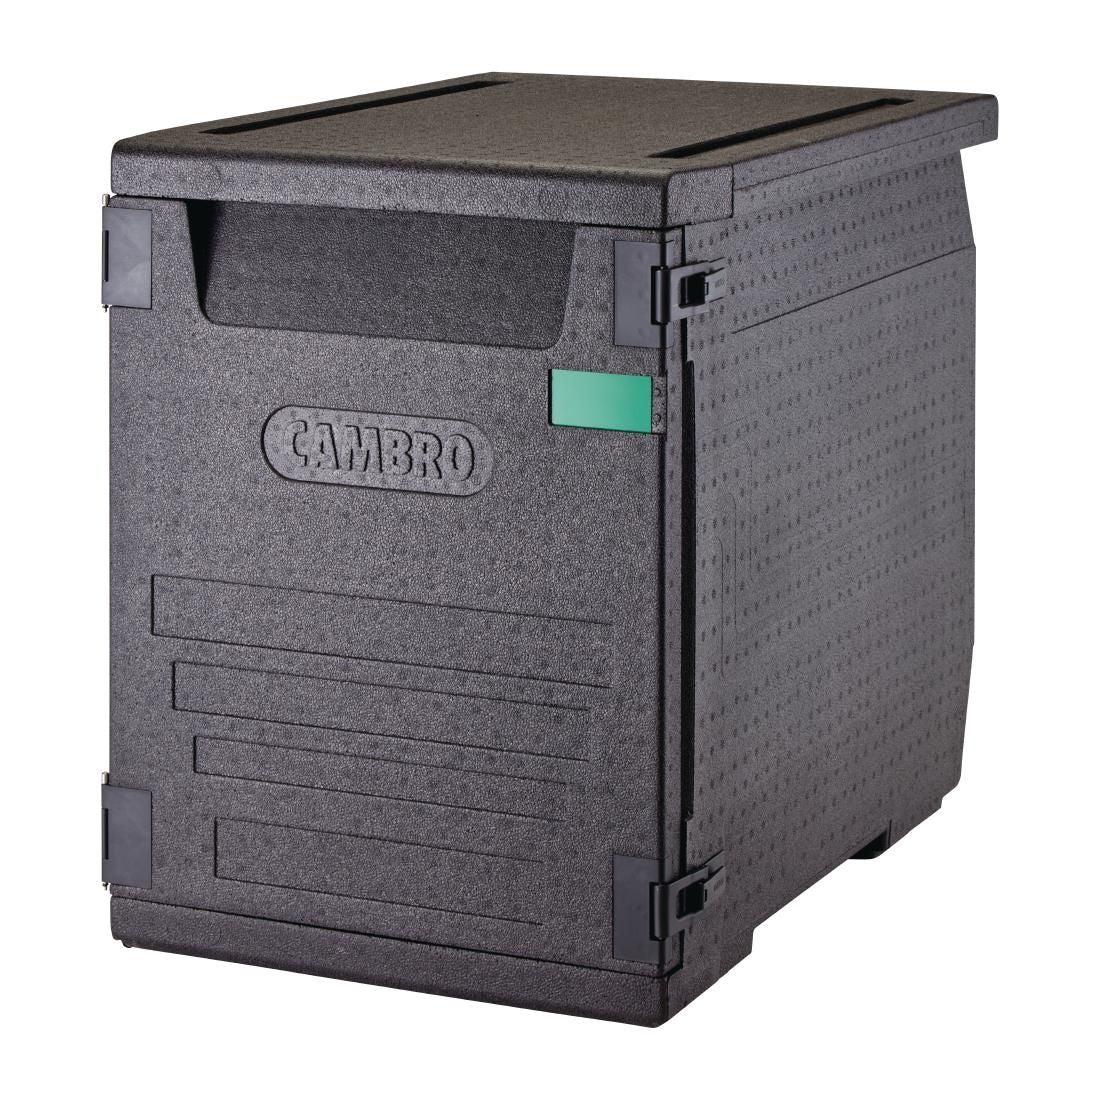 Cambro Insulated Front Loading Food Pan Carrier 126 Litre With 9 Rails JD Catering Equipment Solutions Ltd